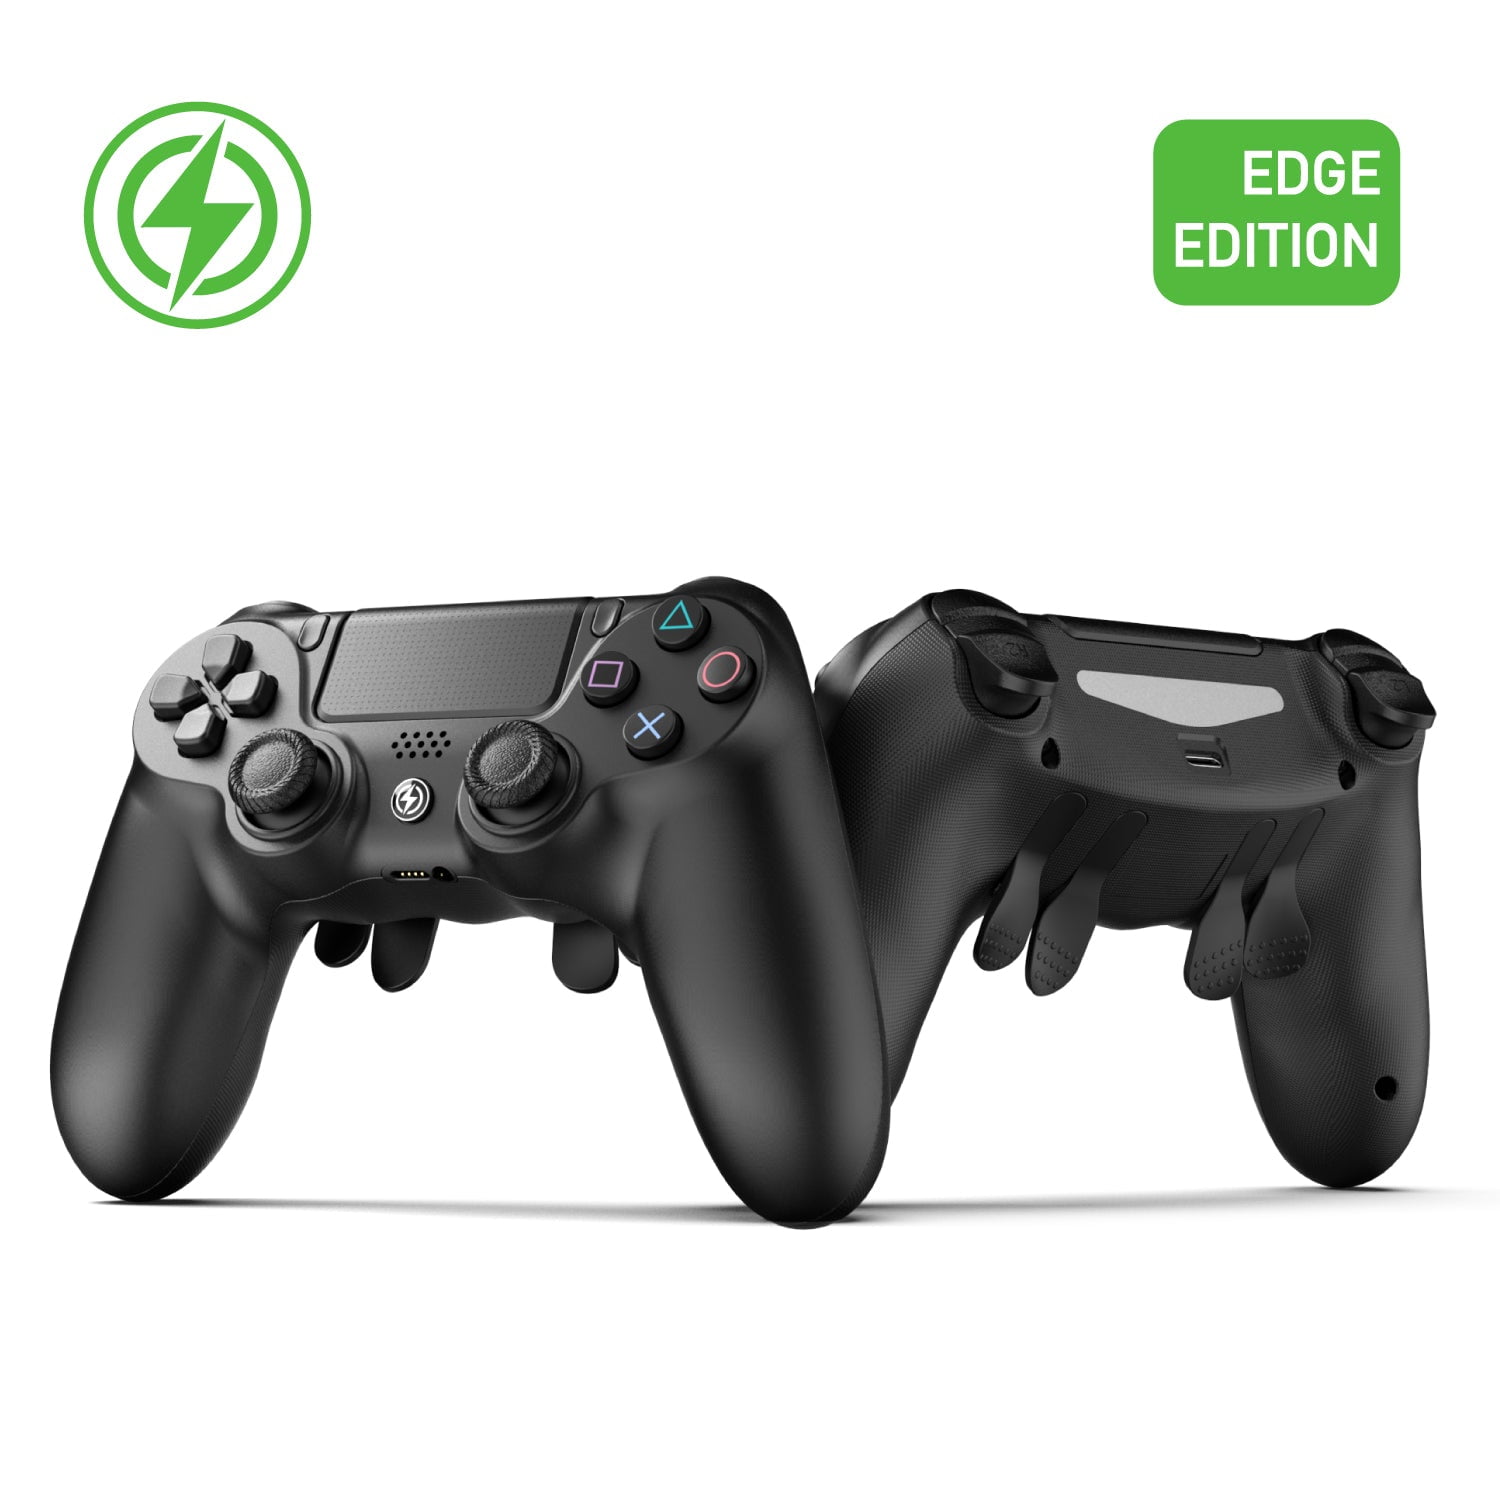 Sonicon PS4 Wireless Elite Controller Edge Edition w/ 4 Remappable Back No Drifting Modded Controller for PS4, PC - 3ms Low Latency - Walmart.com